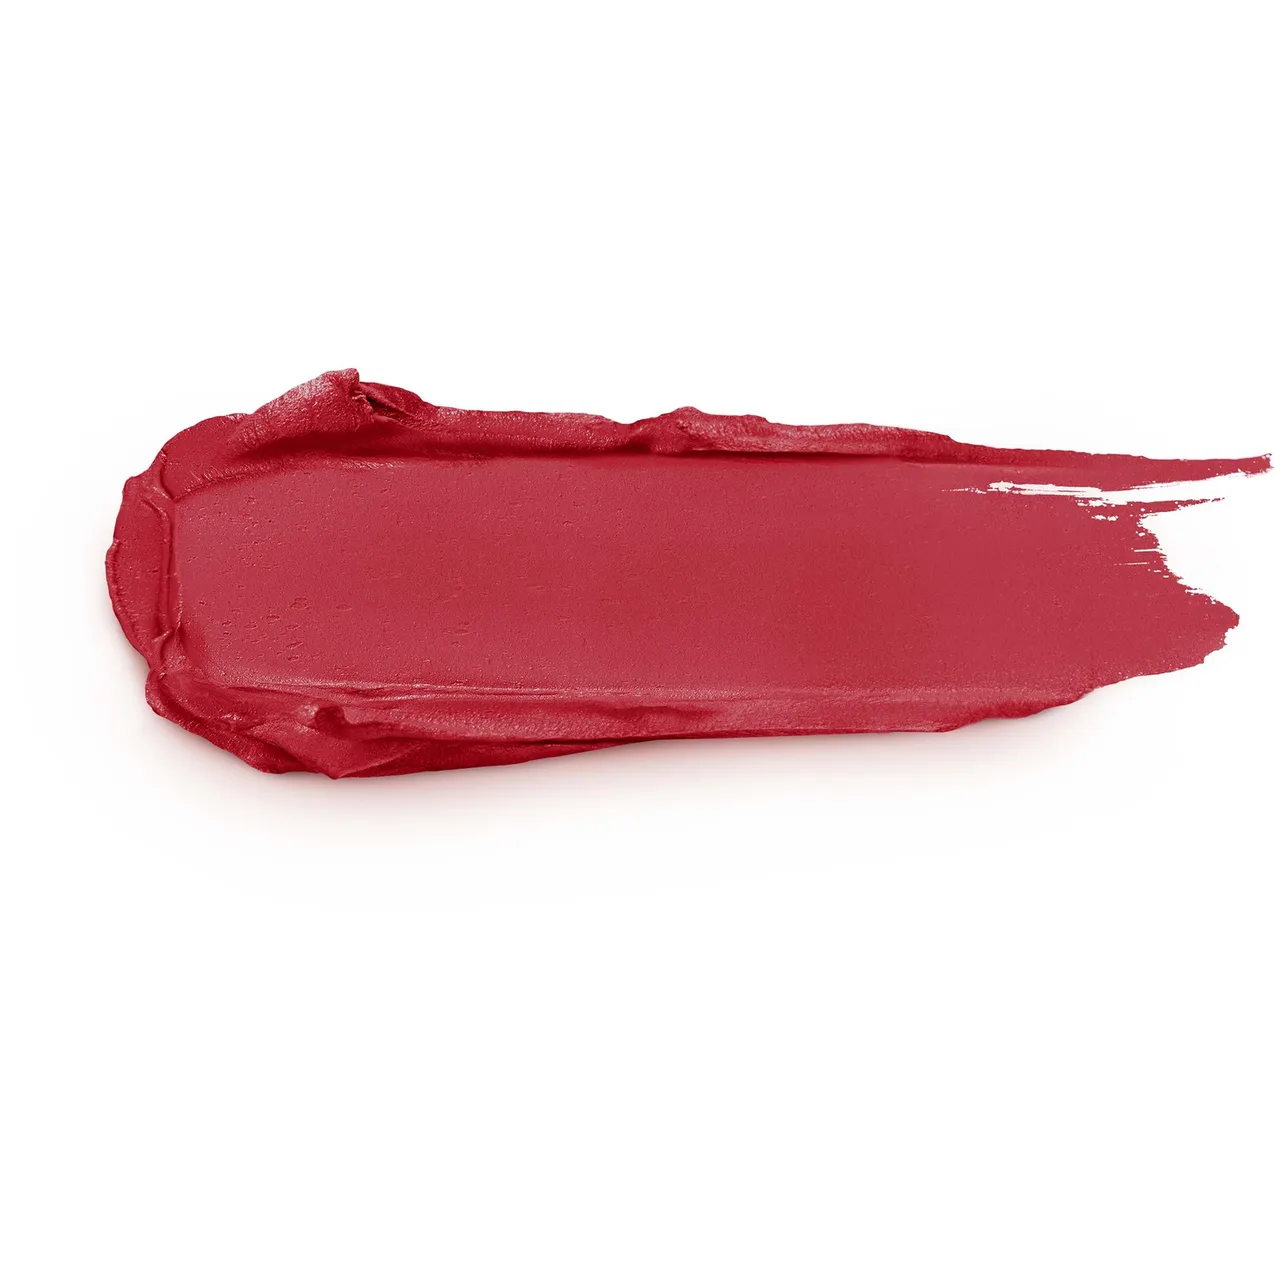 KIKO Milano Unlimited Stylo 2g (Various Shades) - 15 Classic Red